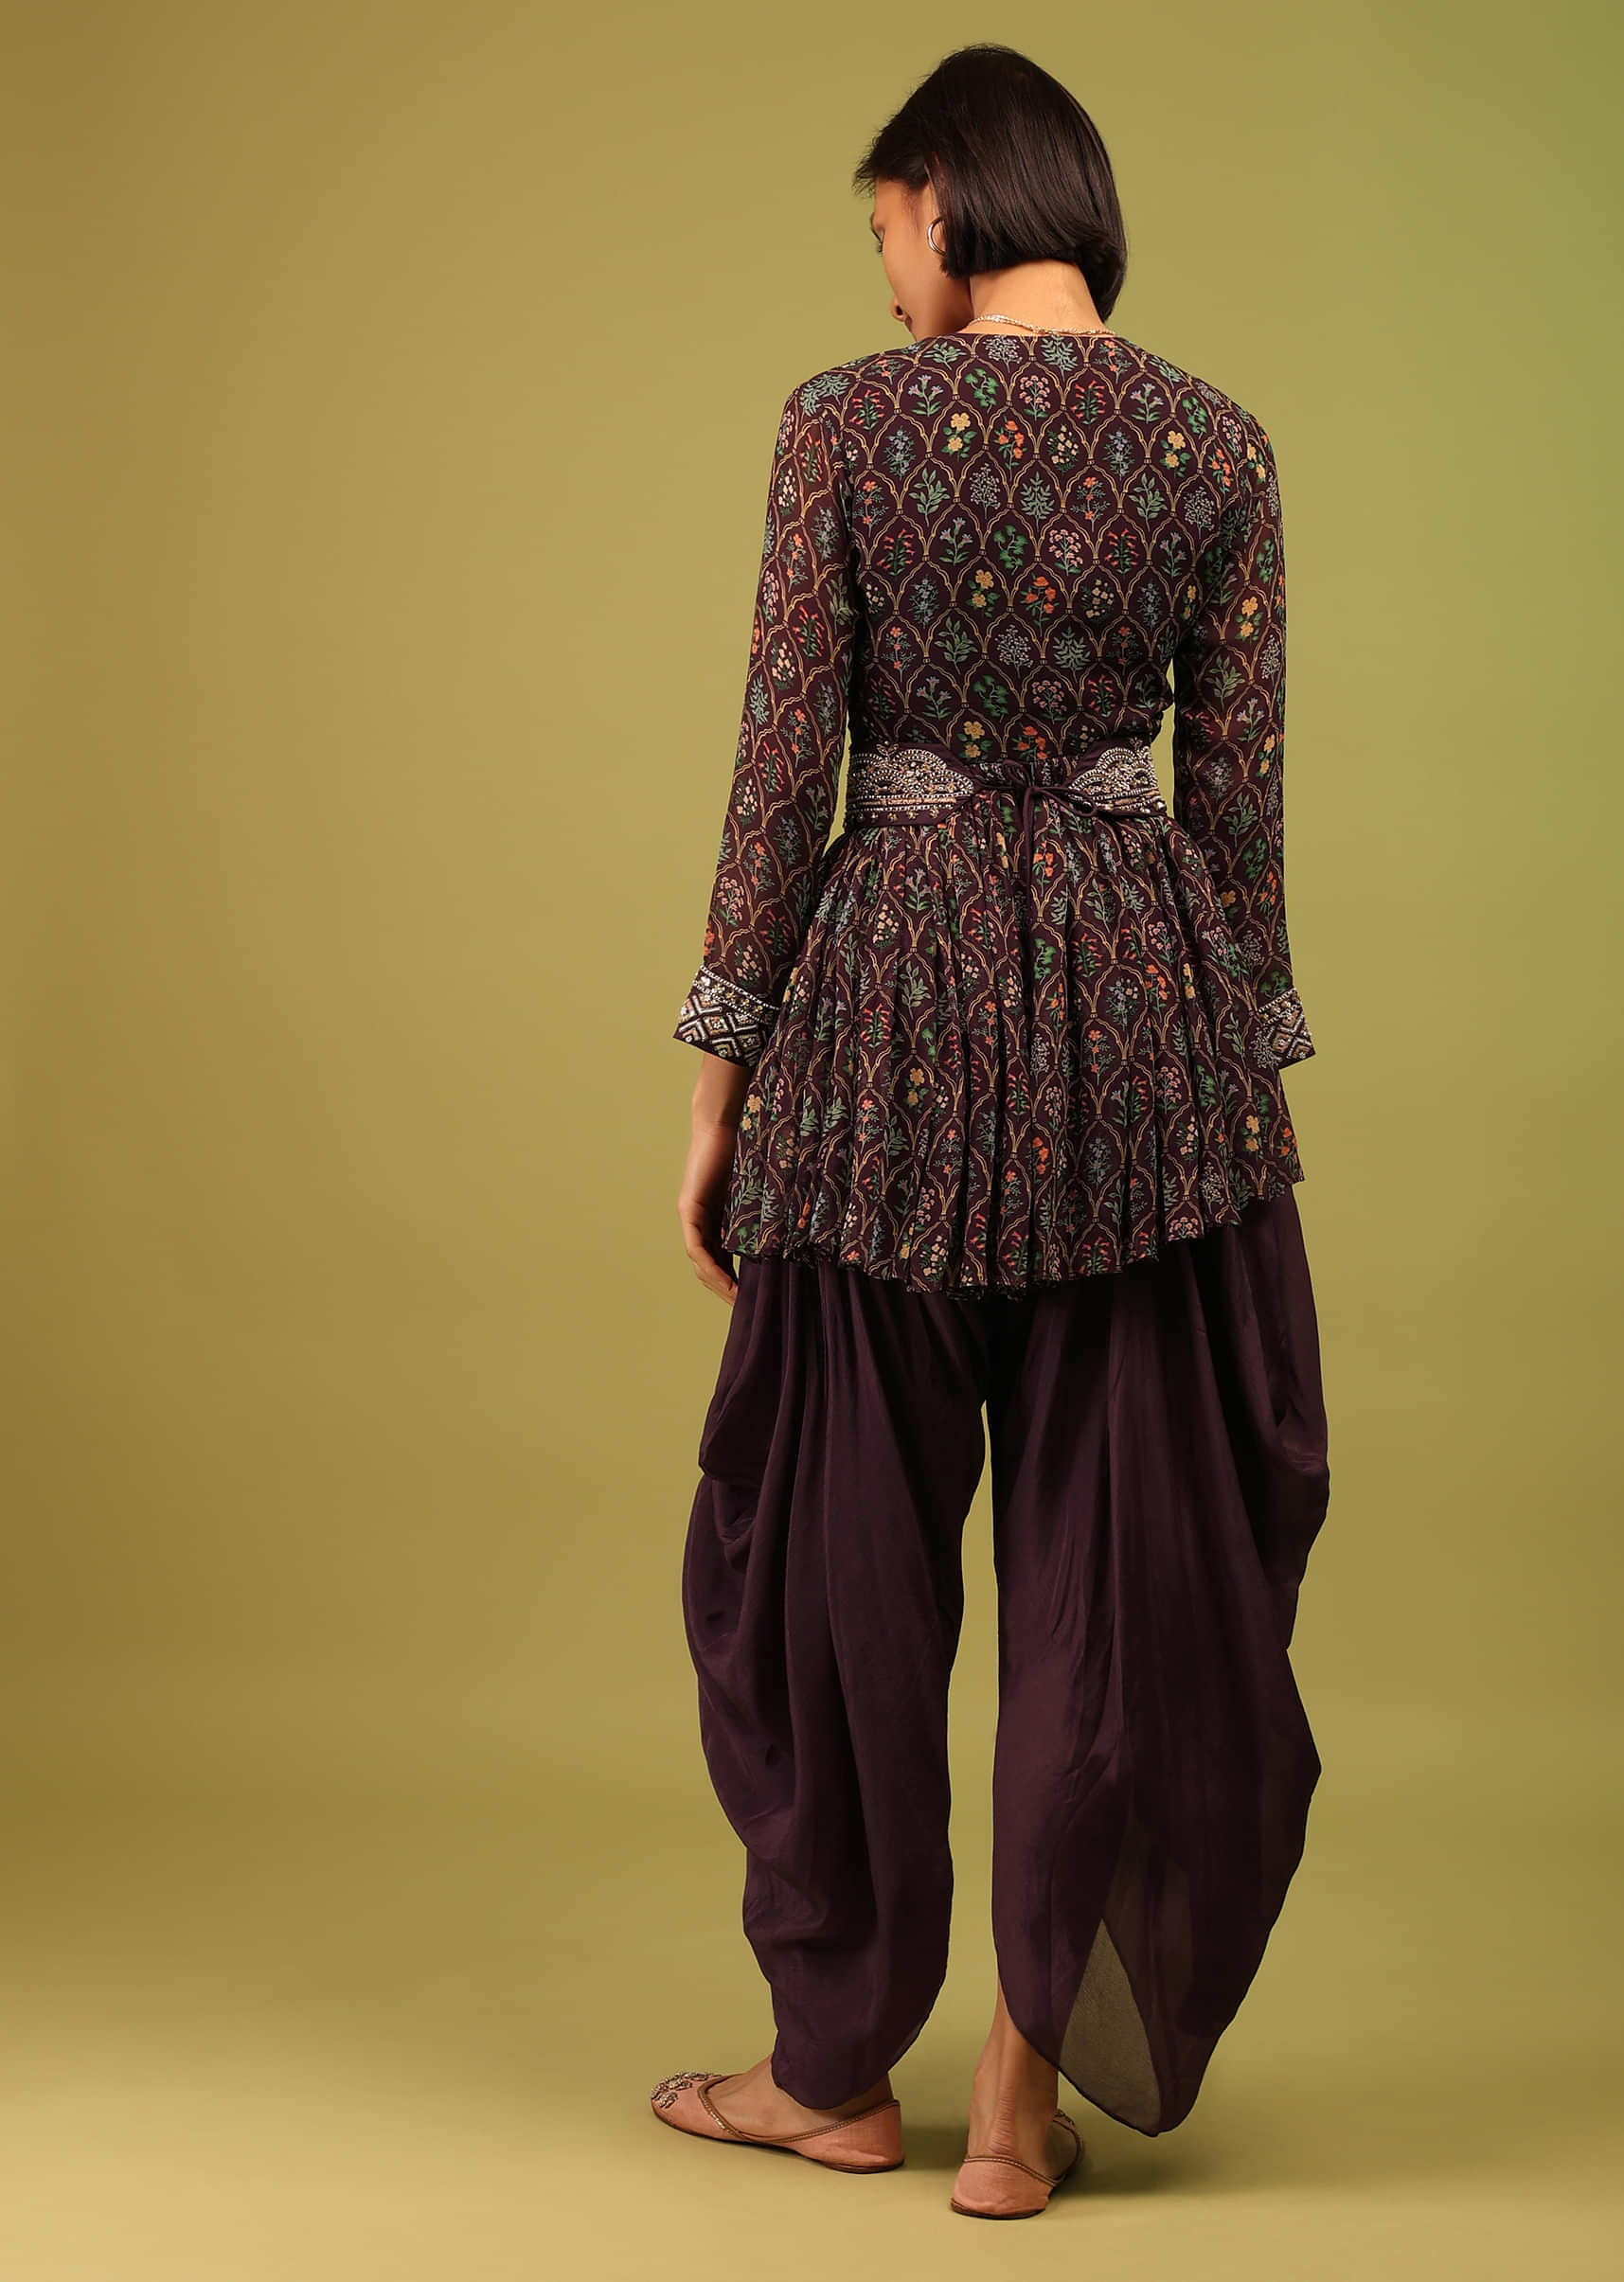 Dusty Brown Dhoti Kurta Set In Georgette With Multicolor Floral Print & Embroidery